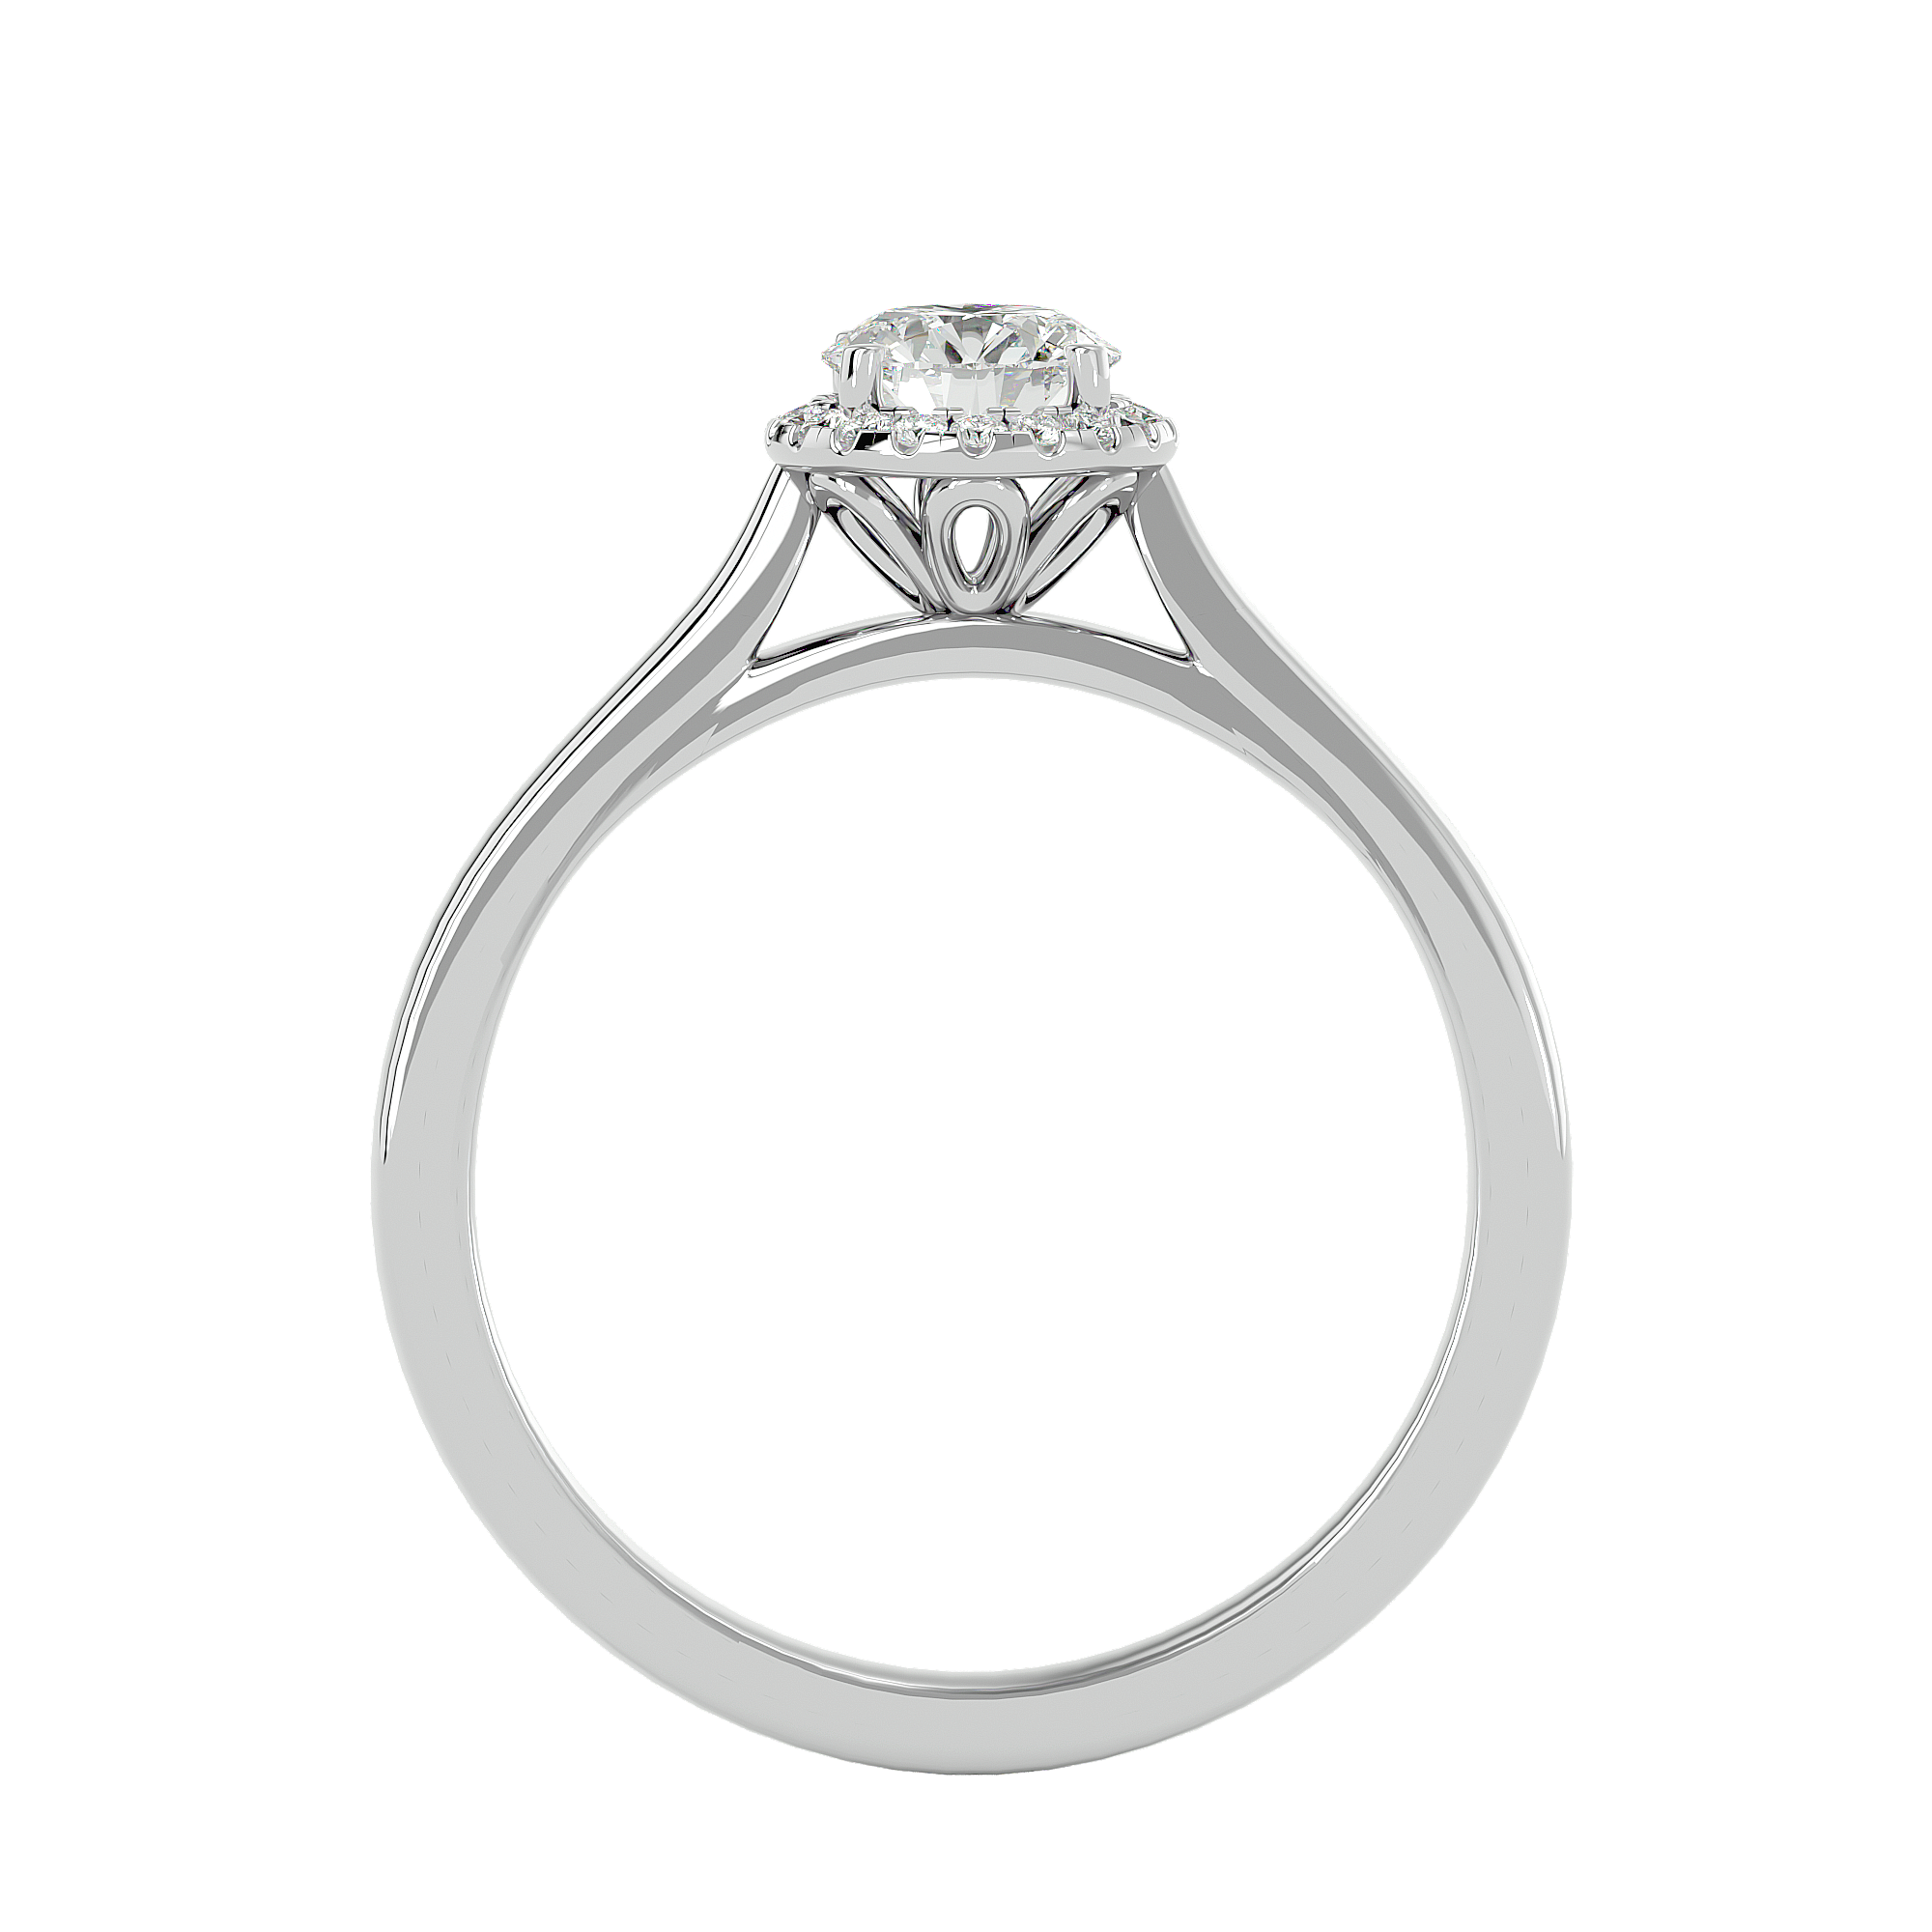 Solitaire Round Halo Diamond Engagement Ring